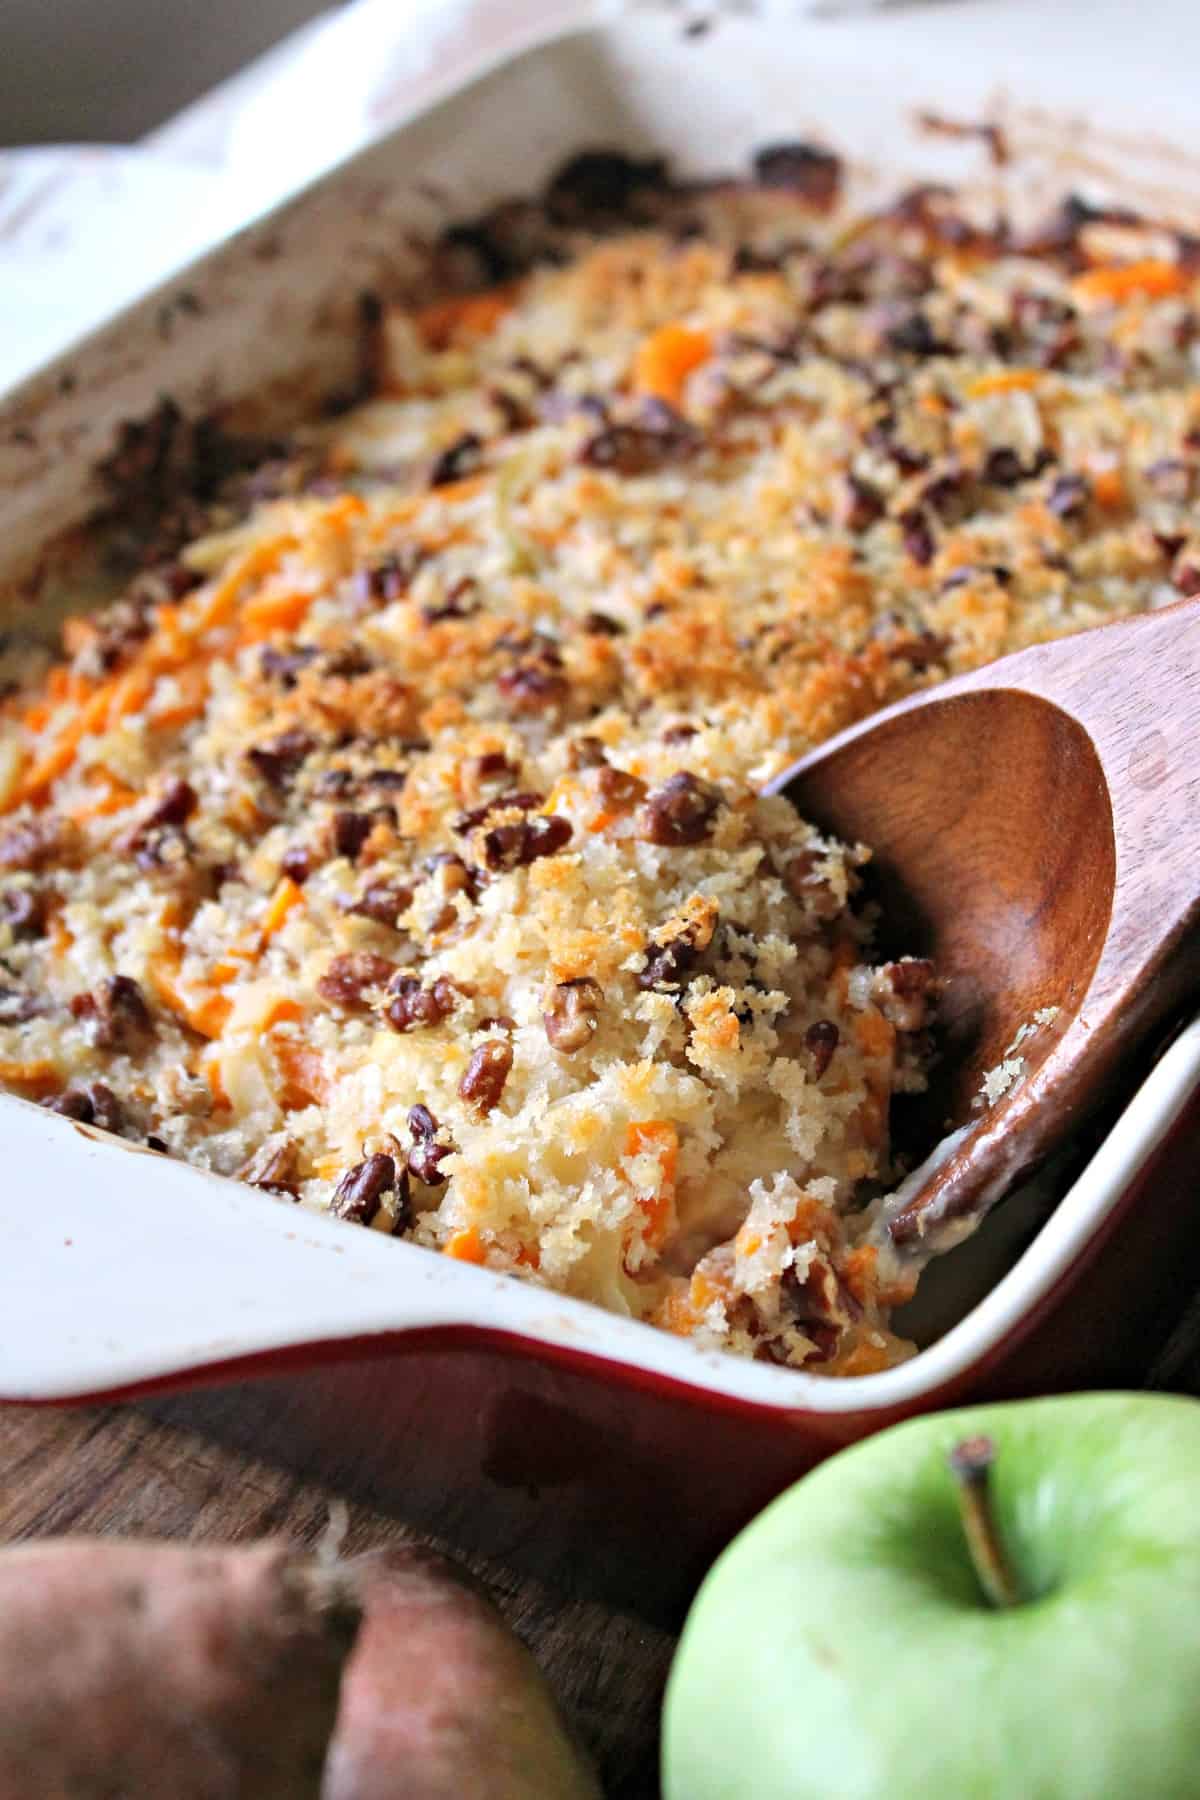 Spiralized Sweet Potato, Apple & Gouda Gratin! A new, delicious way to serve up sweet potatoes at your holiday table. Savory, sweet, creamy & crunchy!